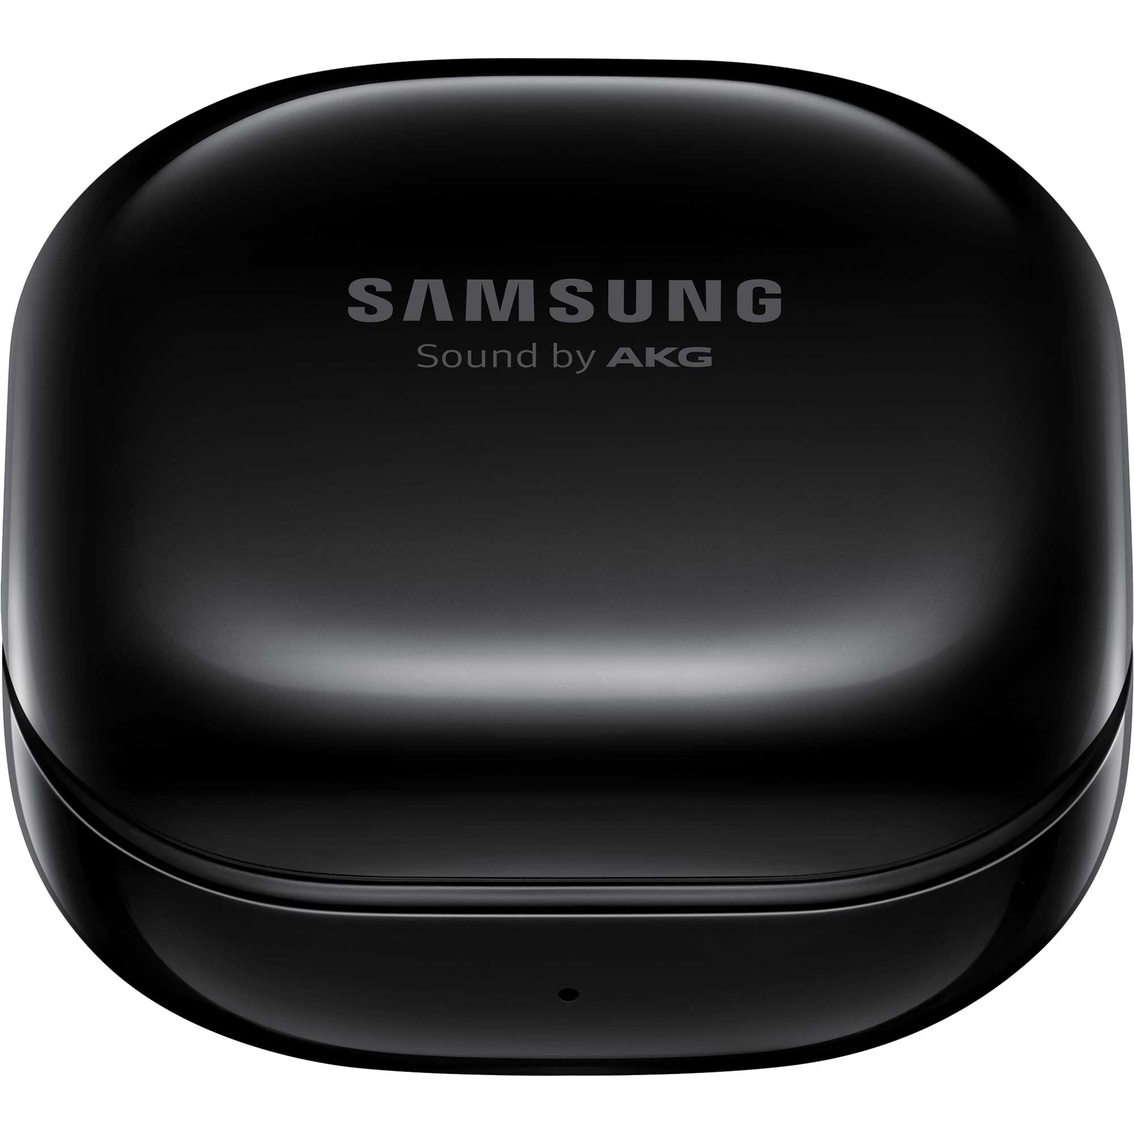 Samsung Galaxy Buds Live Wireless Earbuds - Image 2 of 2